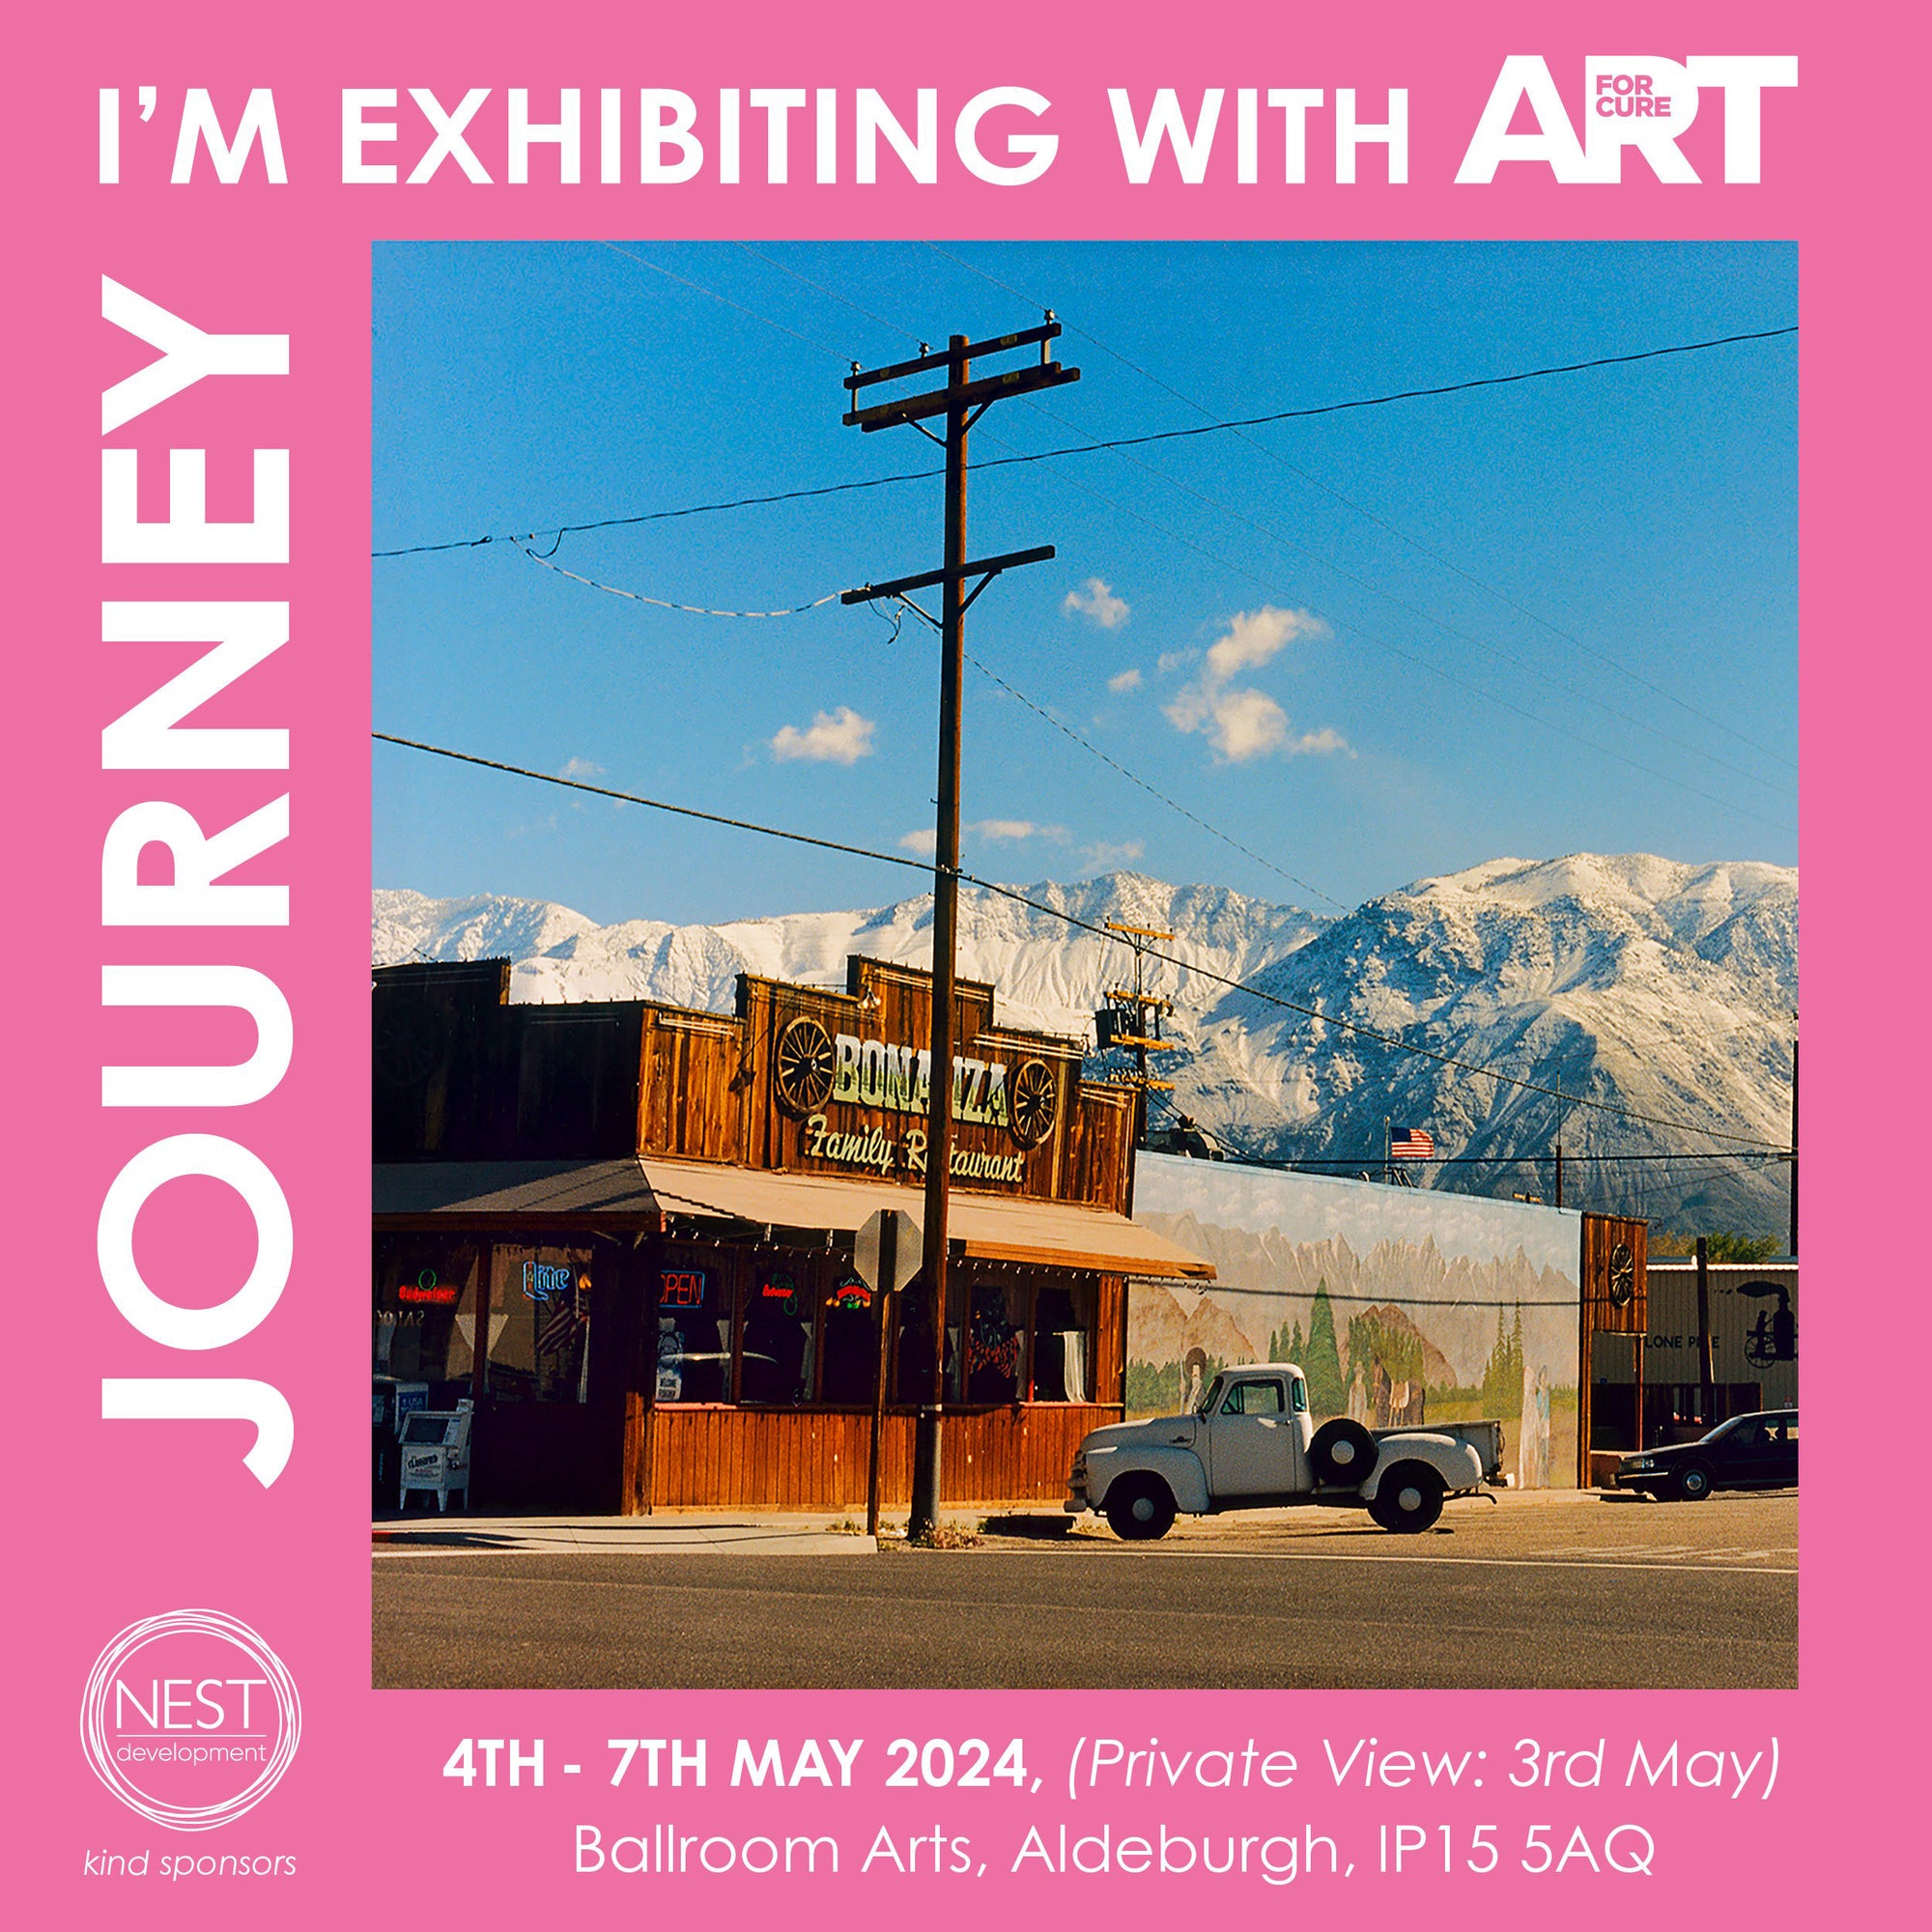 Art For Cure Journey Exhibition May 2024